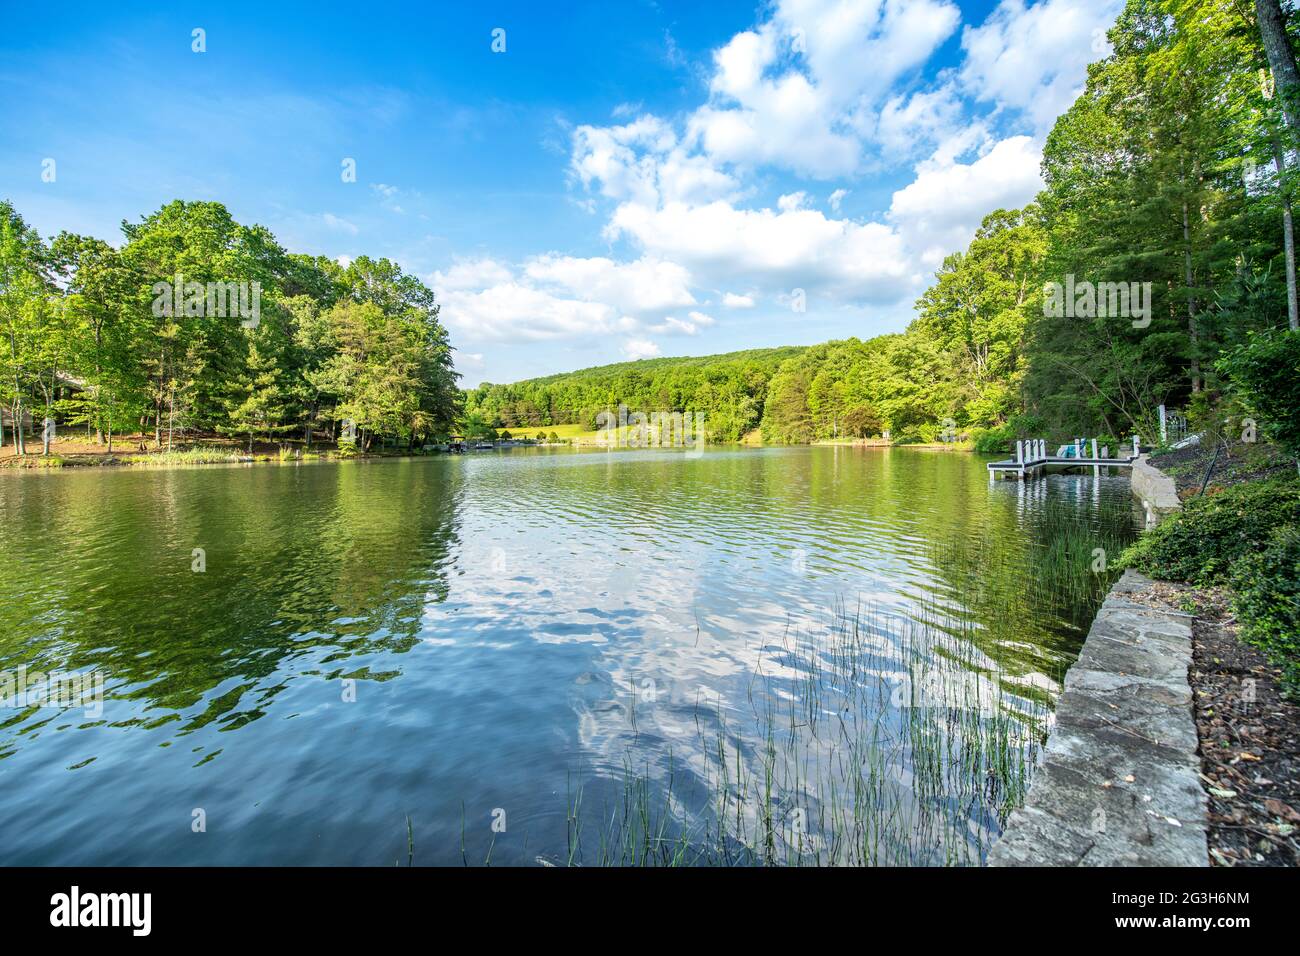 Scenic panorama of Lake Dartmoor in Tennessee shows a very calm, glassy lake surface with rich, healthy oak trees lining the shoreline. Stock Photo